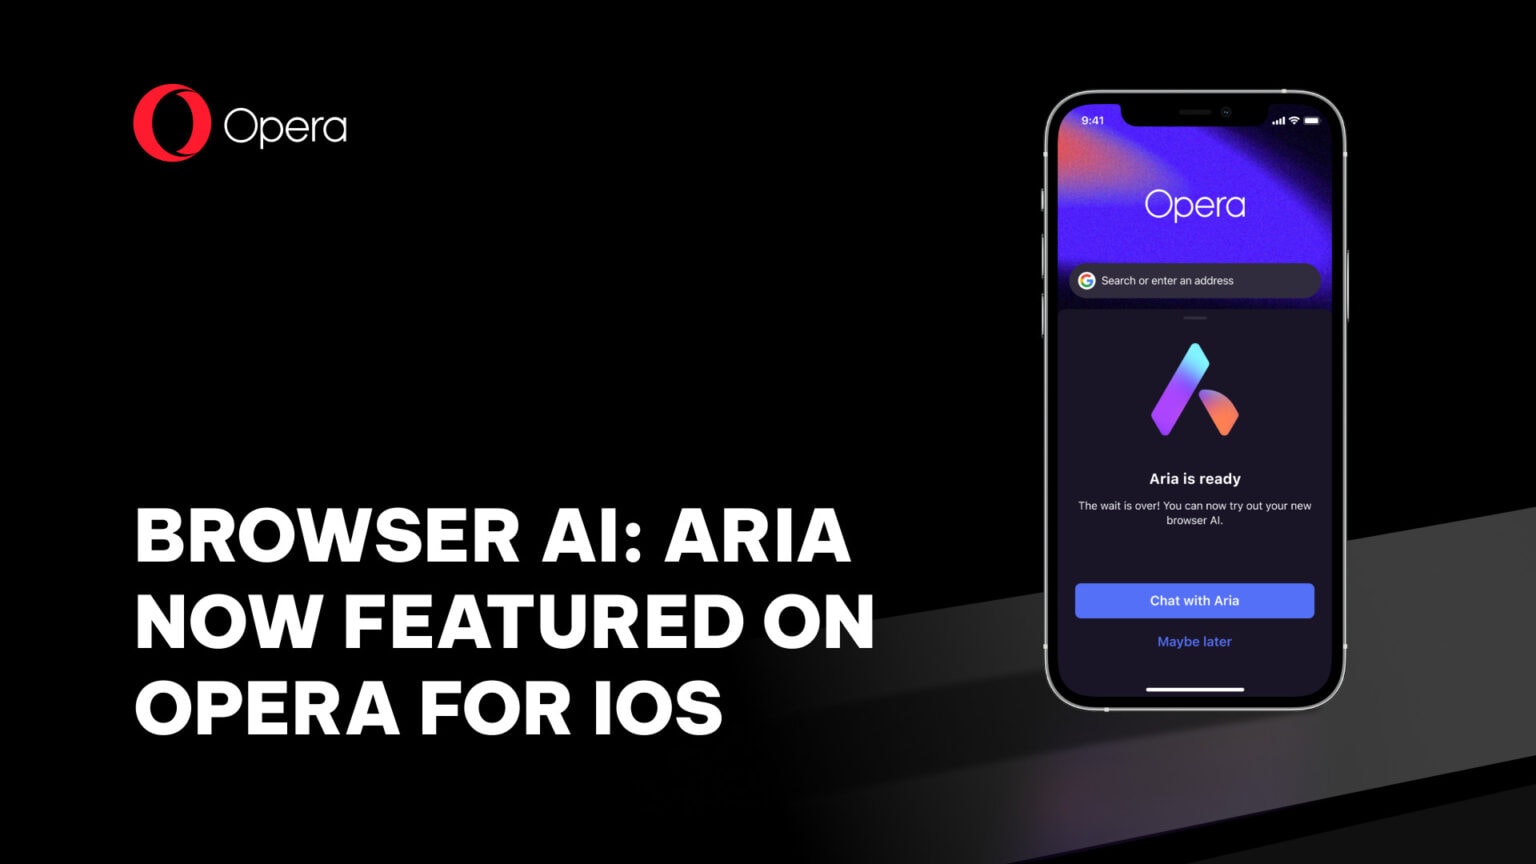 Now you have another option for using AI on your iPhone.